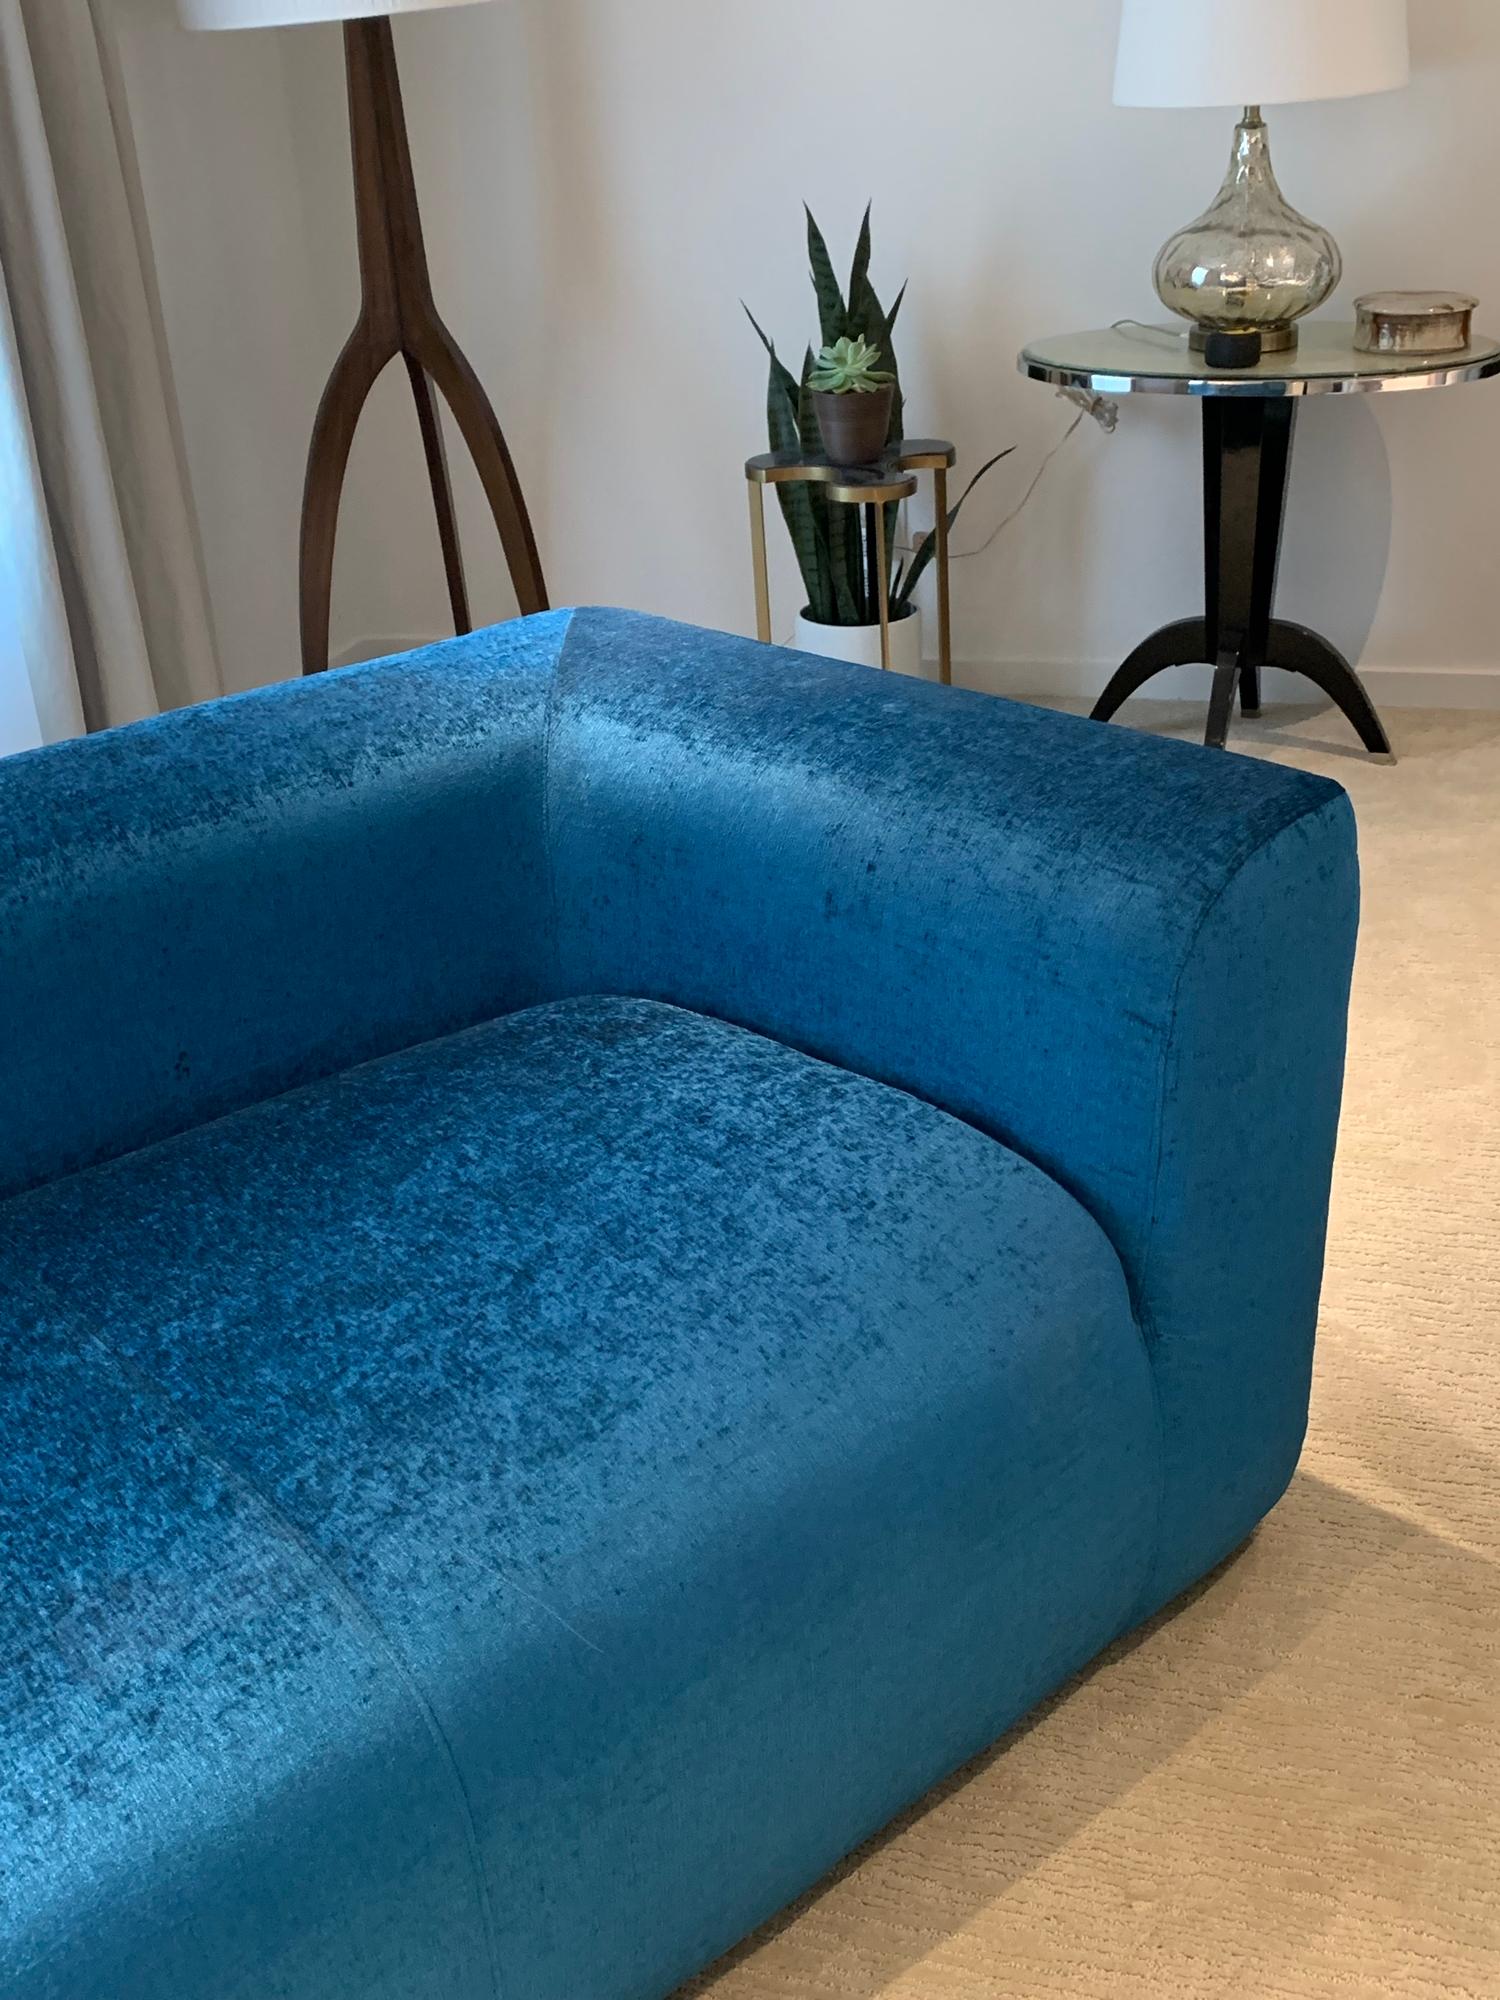 Beautiful 3-seat vintage sofa designed and manufactured in 1975 by August Inc. and part of the August series.
The sofa was recently upholstered in a blue Romo fabric and is in excellent condition and ready to ship.
Measurements:
84” wide x 32”